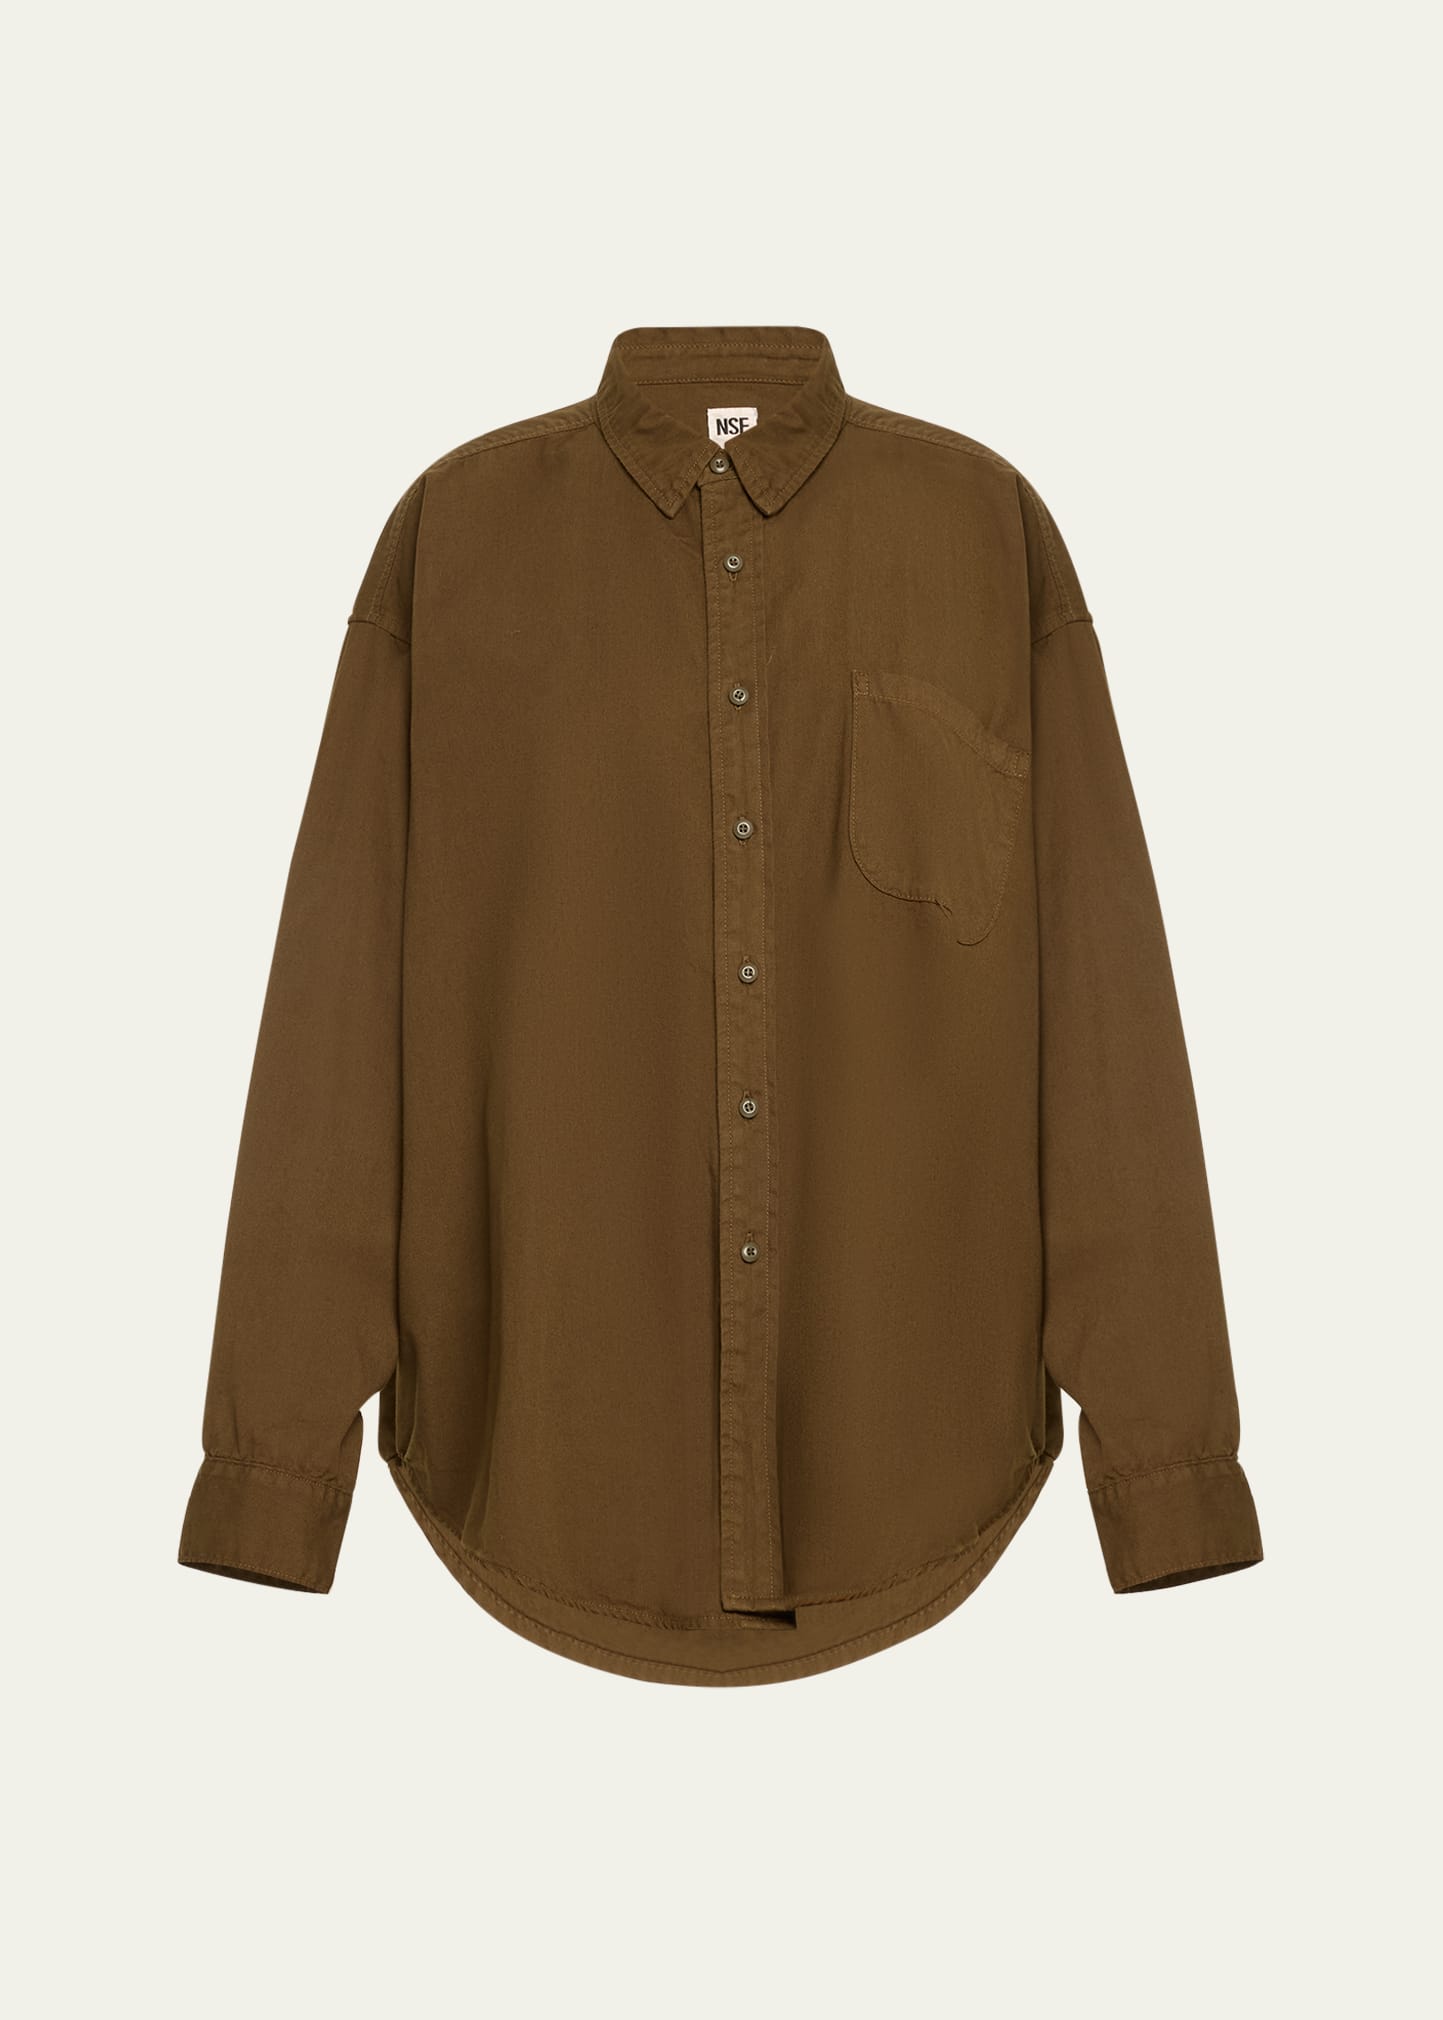 Nsf Clothing Sydney Oversized Woven Cotton Shirt In Colonial